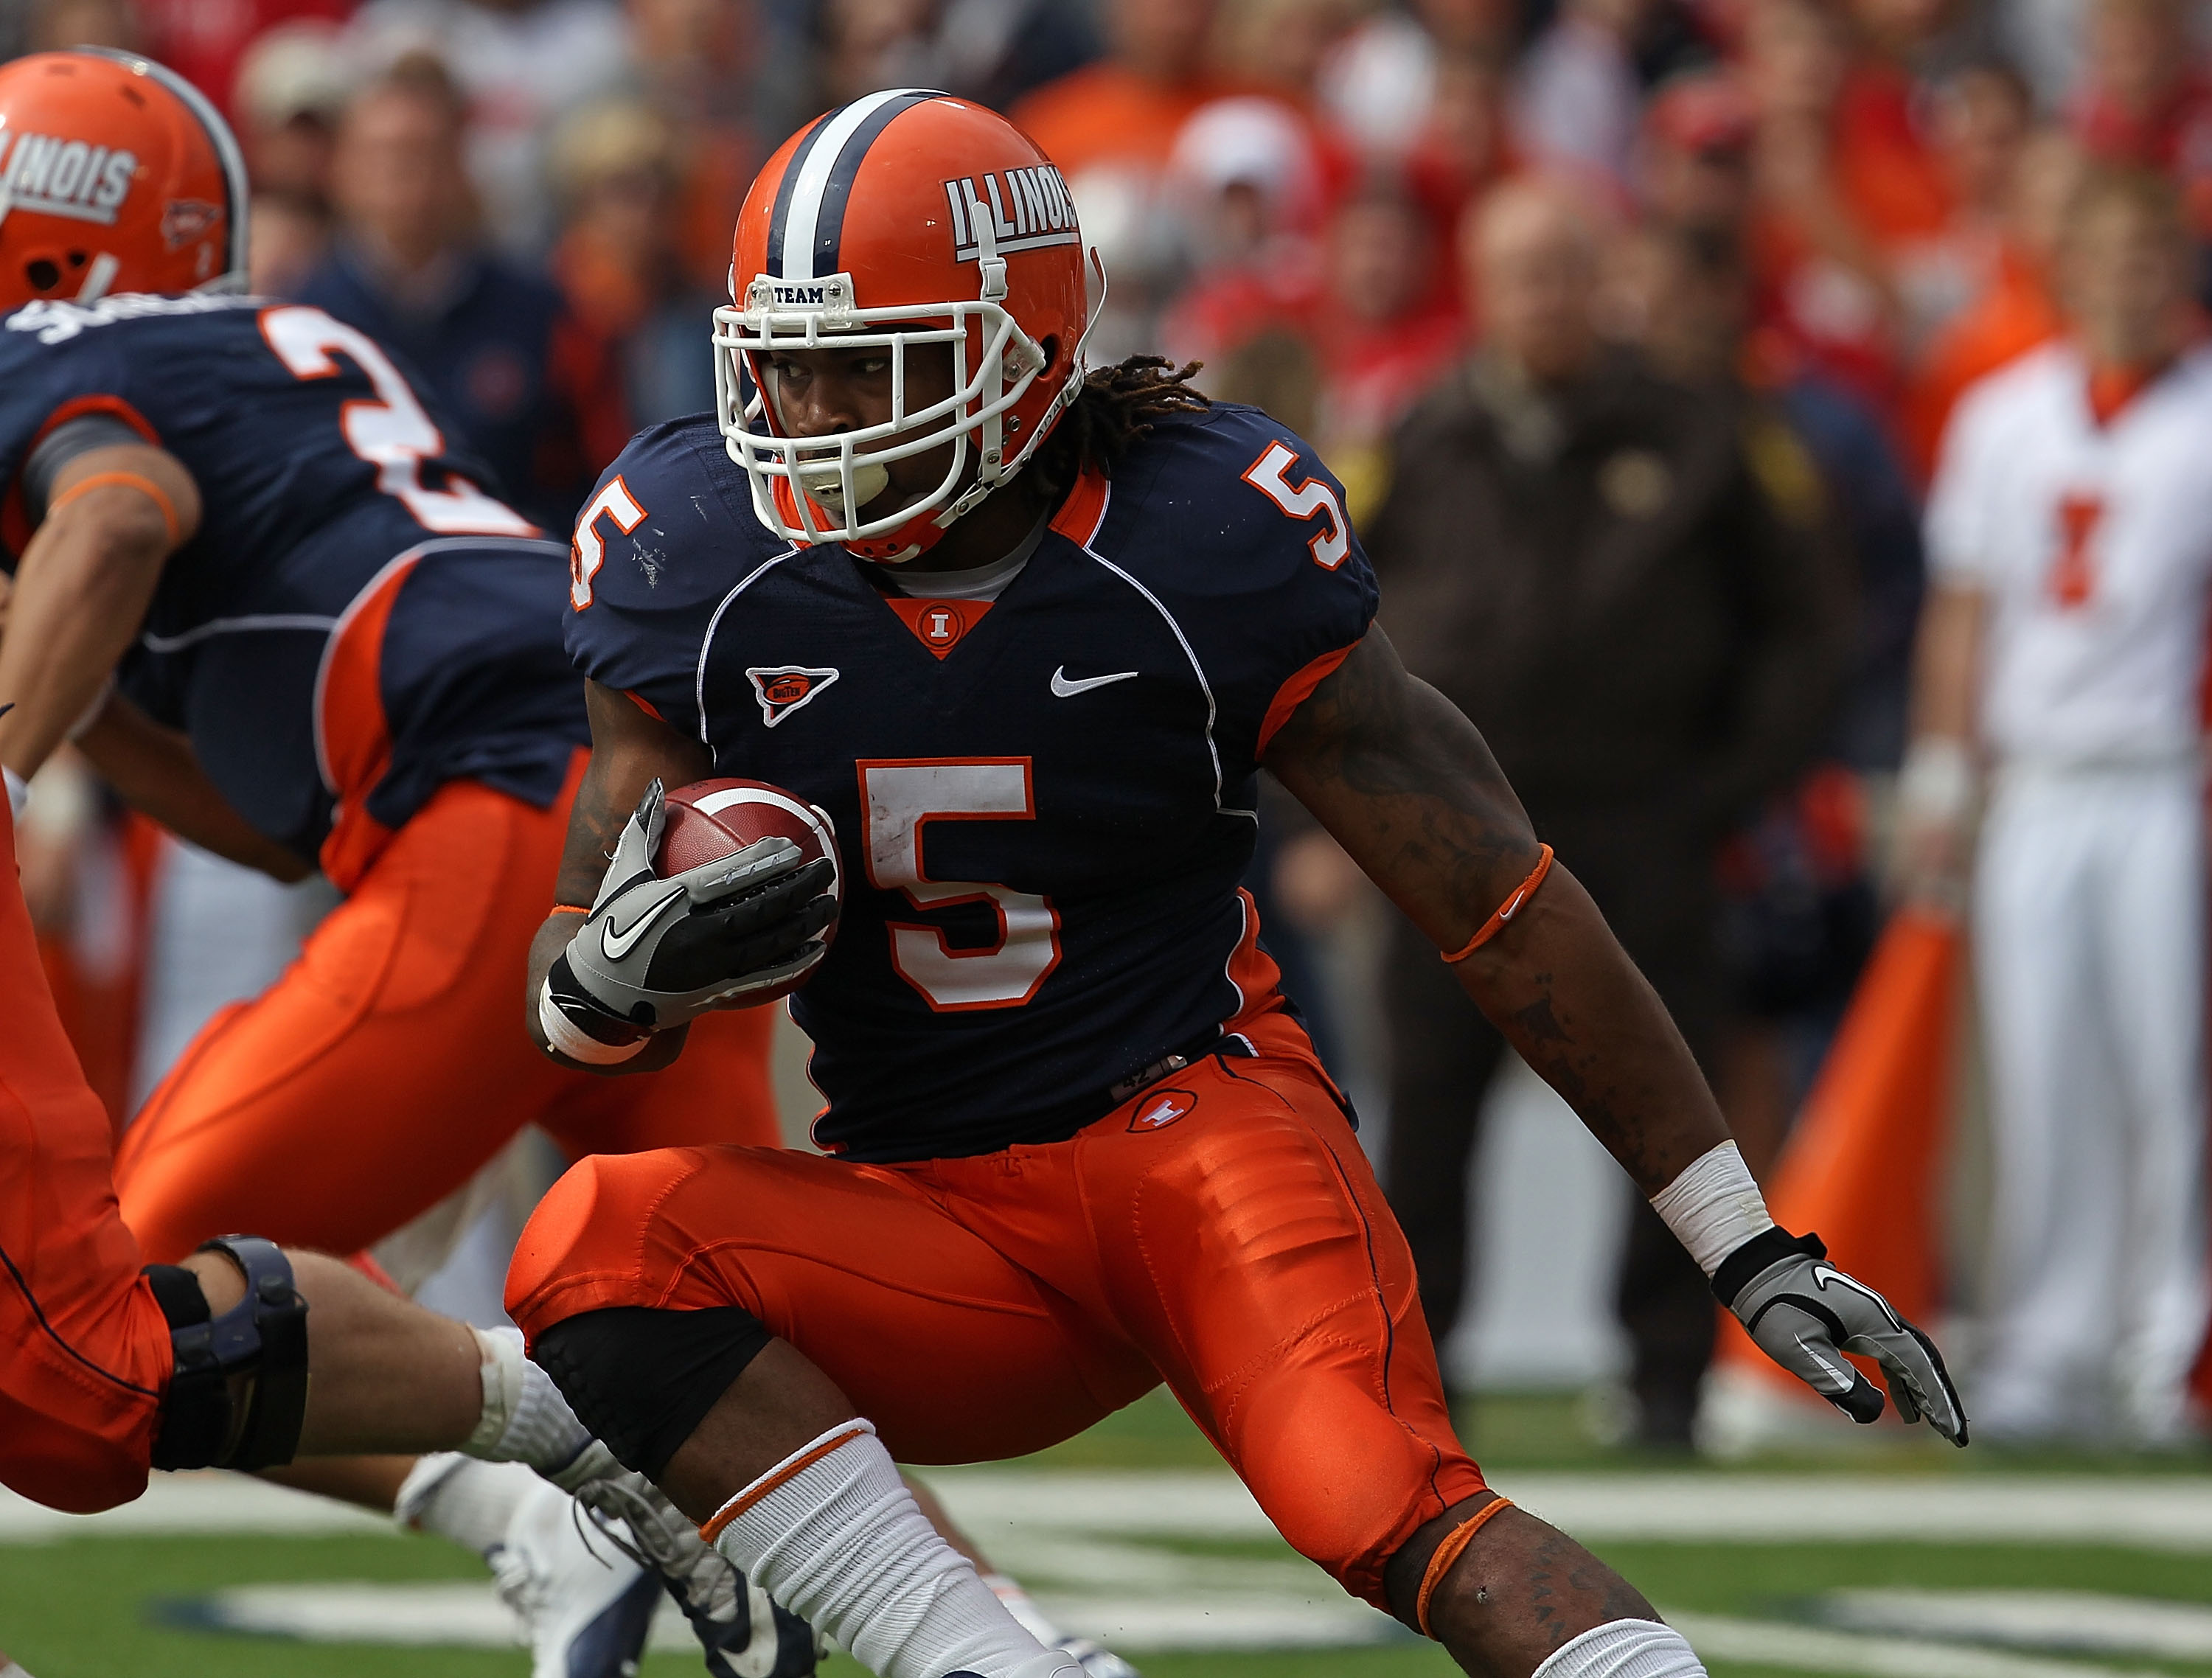 CHAMPAIGN, IL - OCTOBER 02: Mikel Leshoure #5 of the Illinois Fighting Illini runs against the Ohio State Buckeyes at Memorial Stadium on October 2, 2010 in Champaign, Illinois. Ohio State defeated Illinois 24-13. (Photo by Jonathan Daniel/Getty Images)